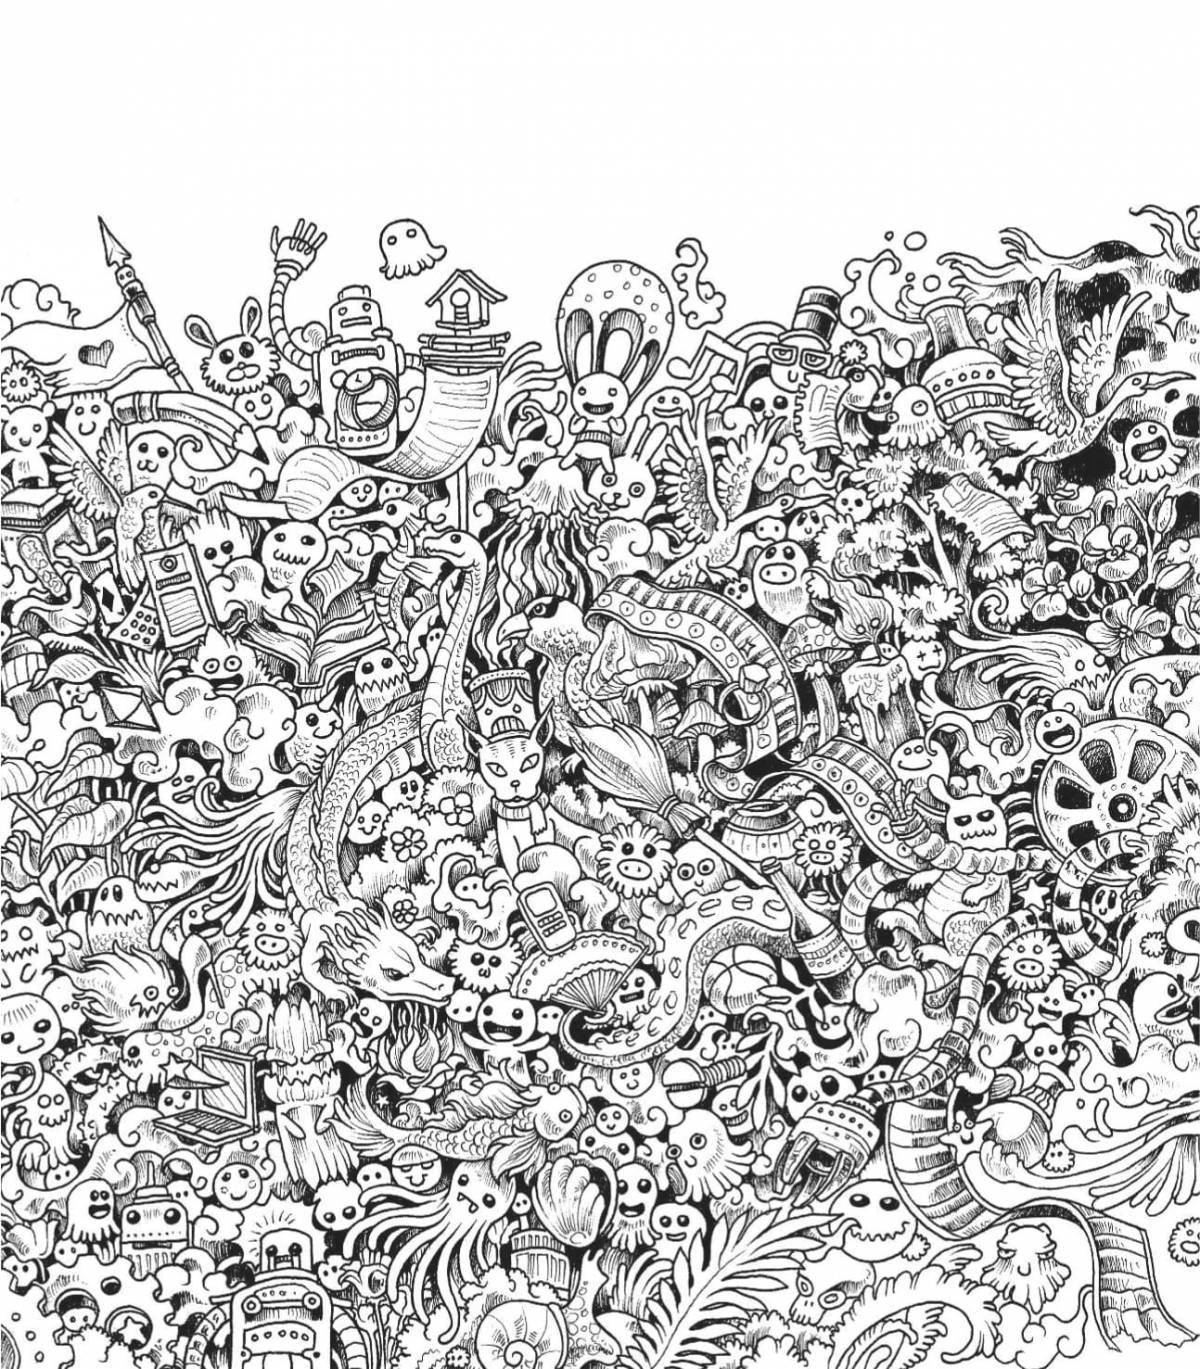 The world's coolest coloring book